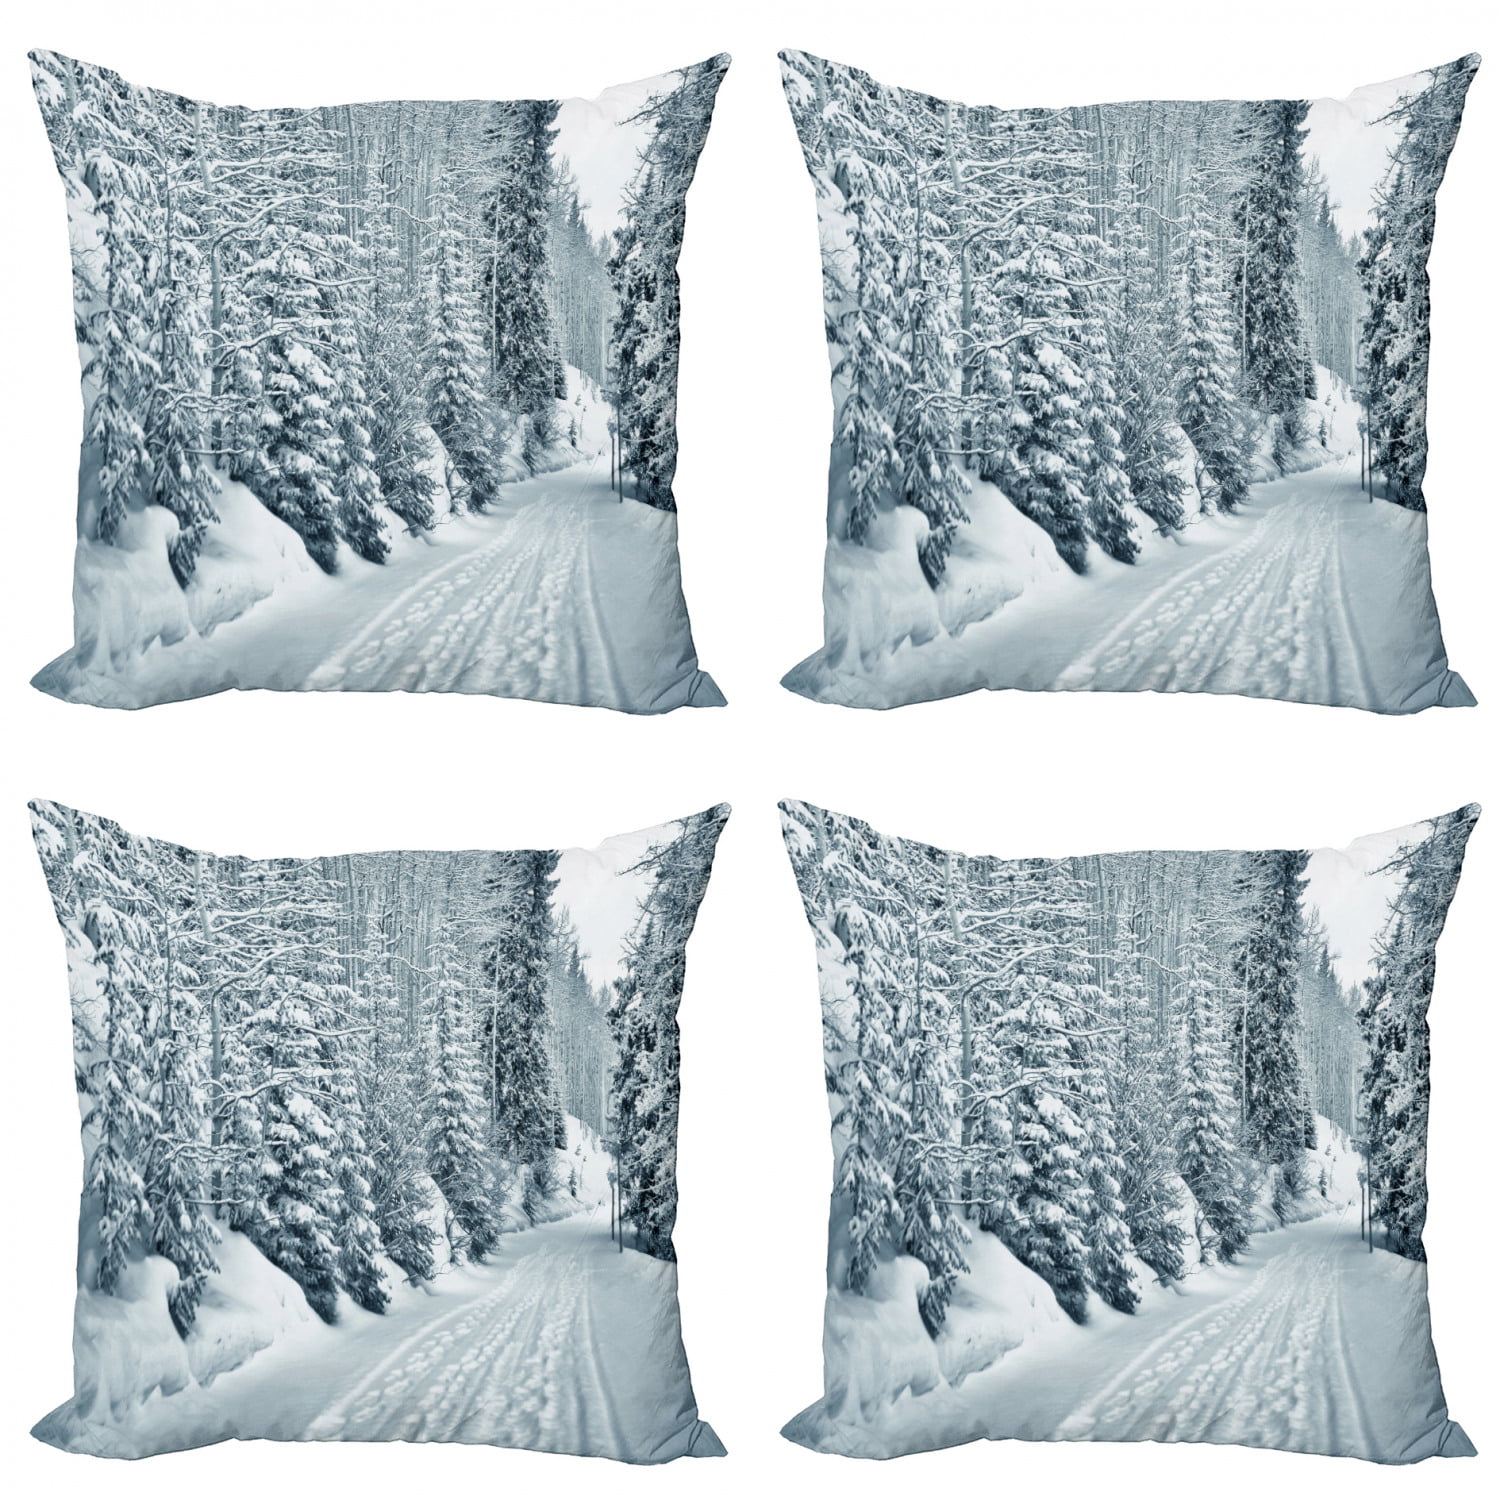 Hobby Occupation Winter Sports Holiday Freestyle Worlds Best Skier Skiing Throw Pillow 18x18 Multicolor